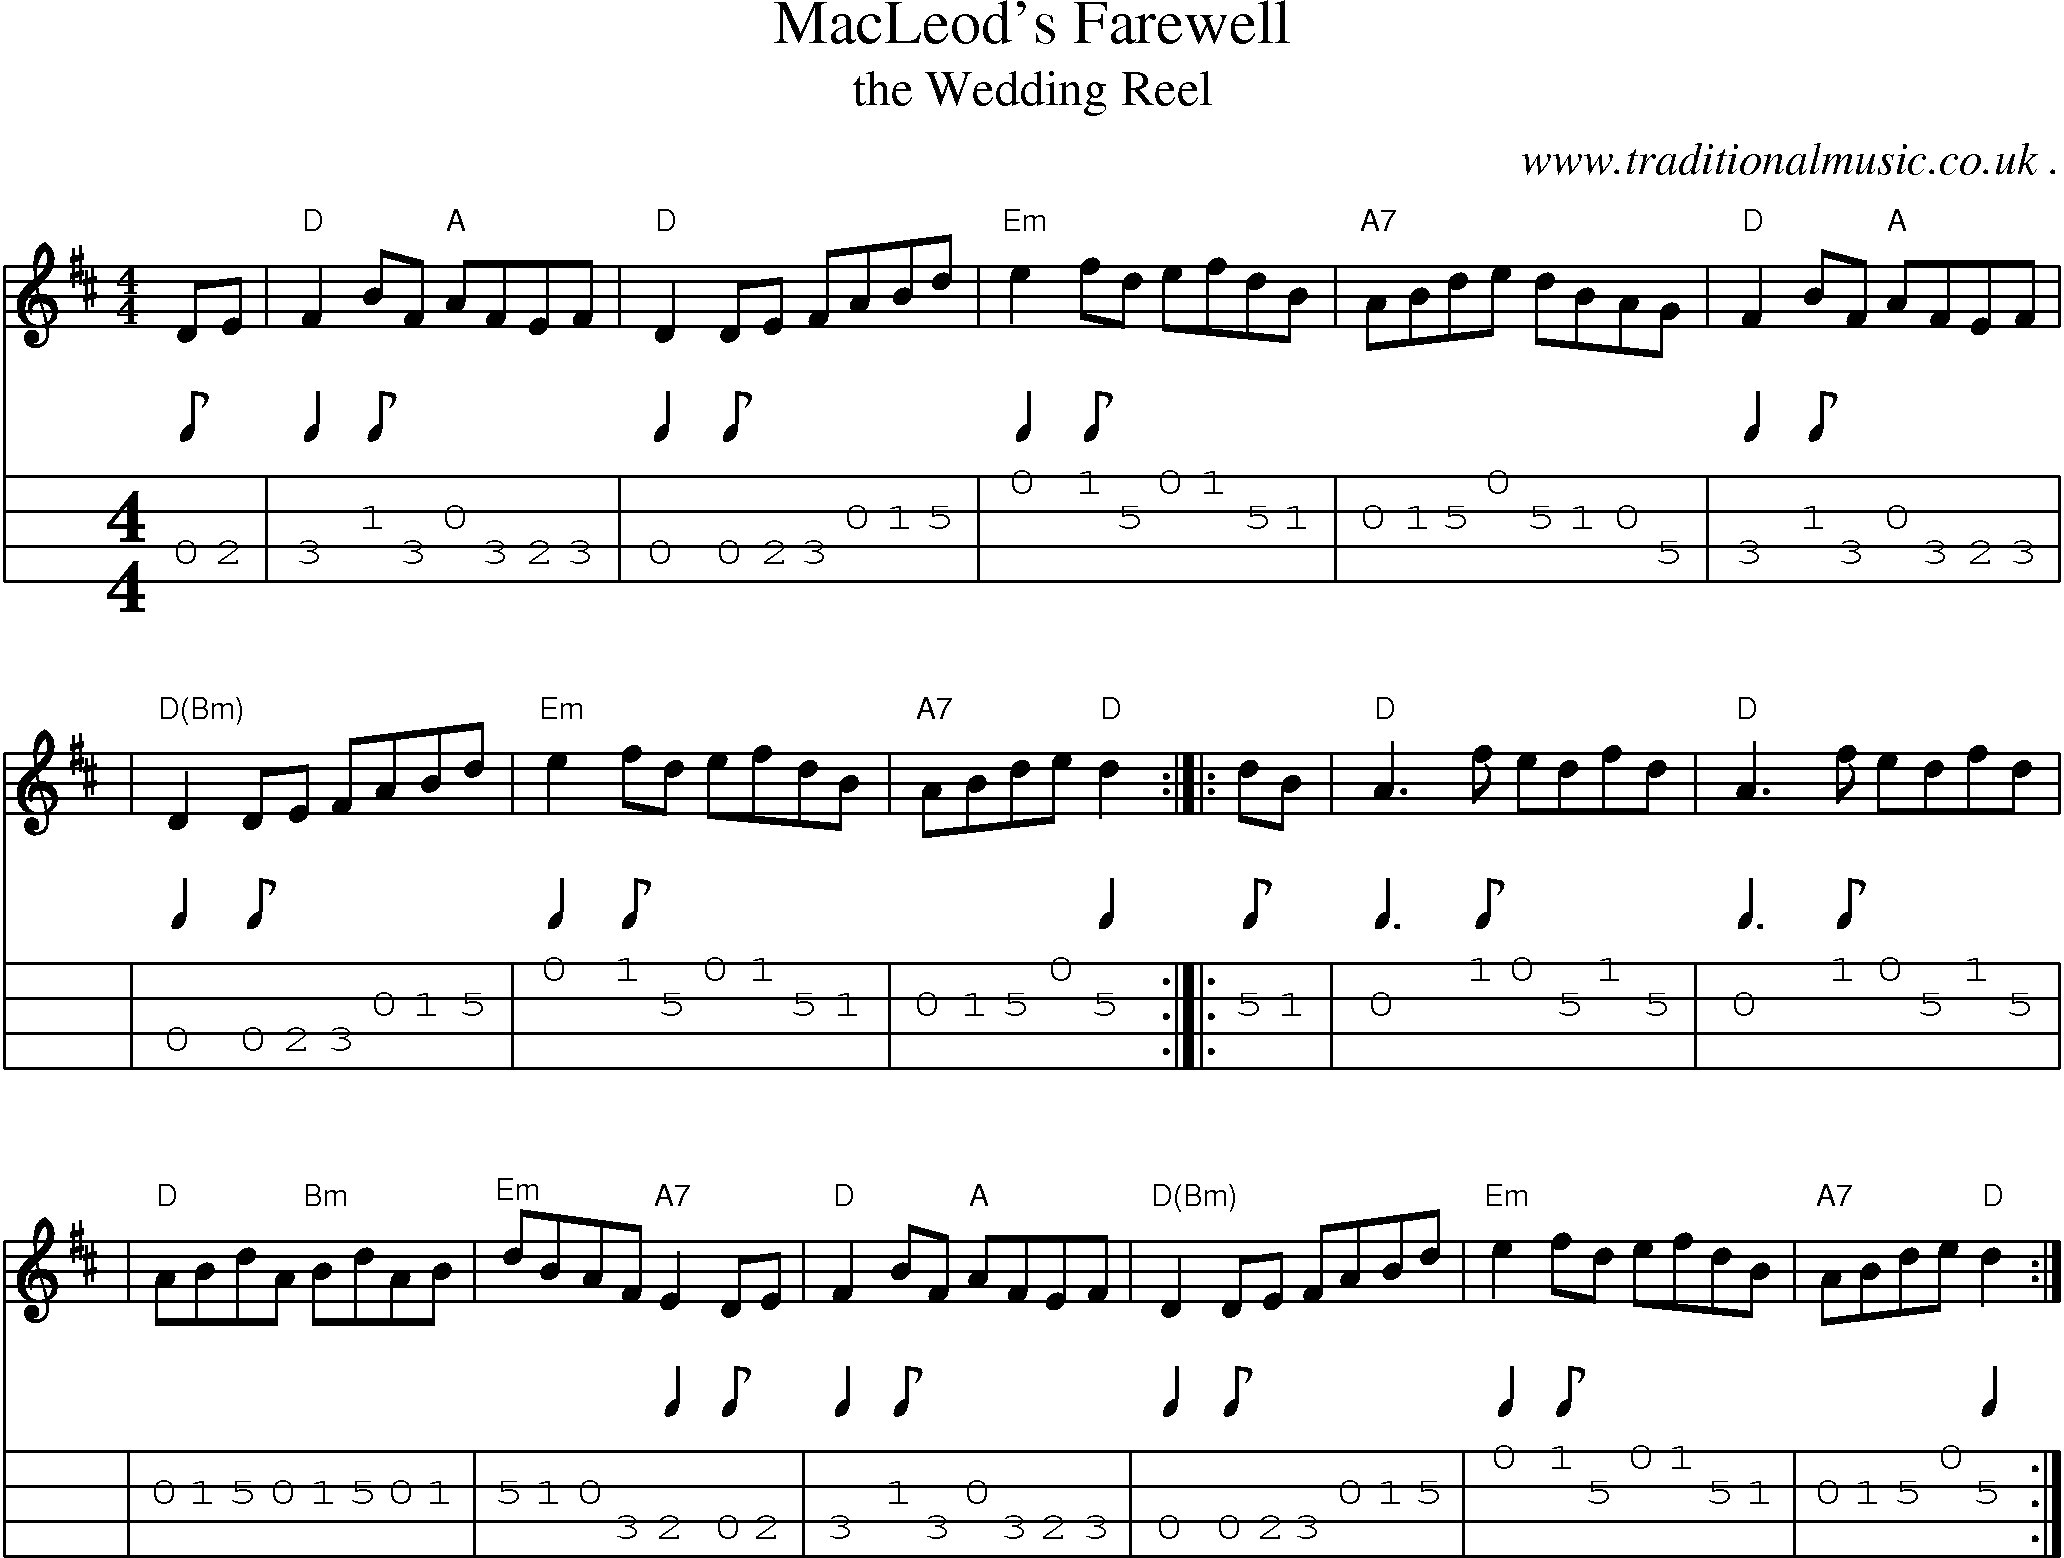 Sheet-music  score, Chords and Mandolin Tabs for Macleods Farewell